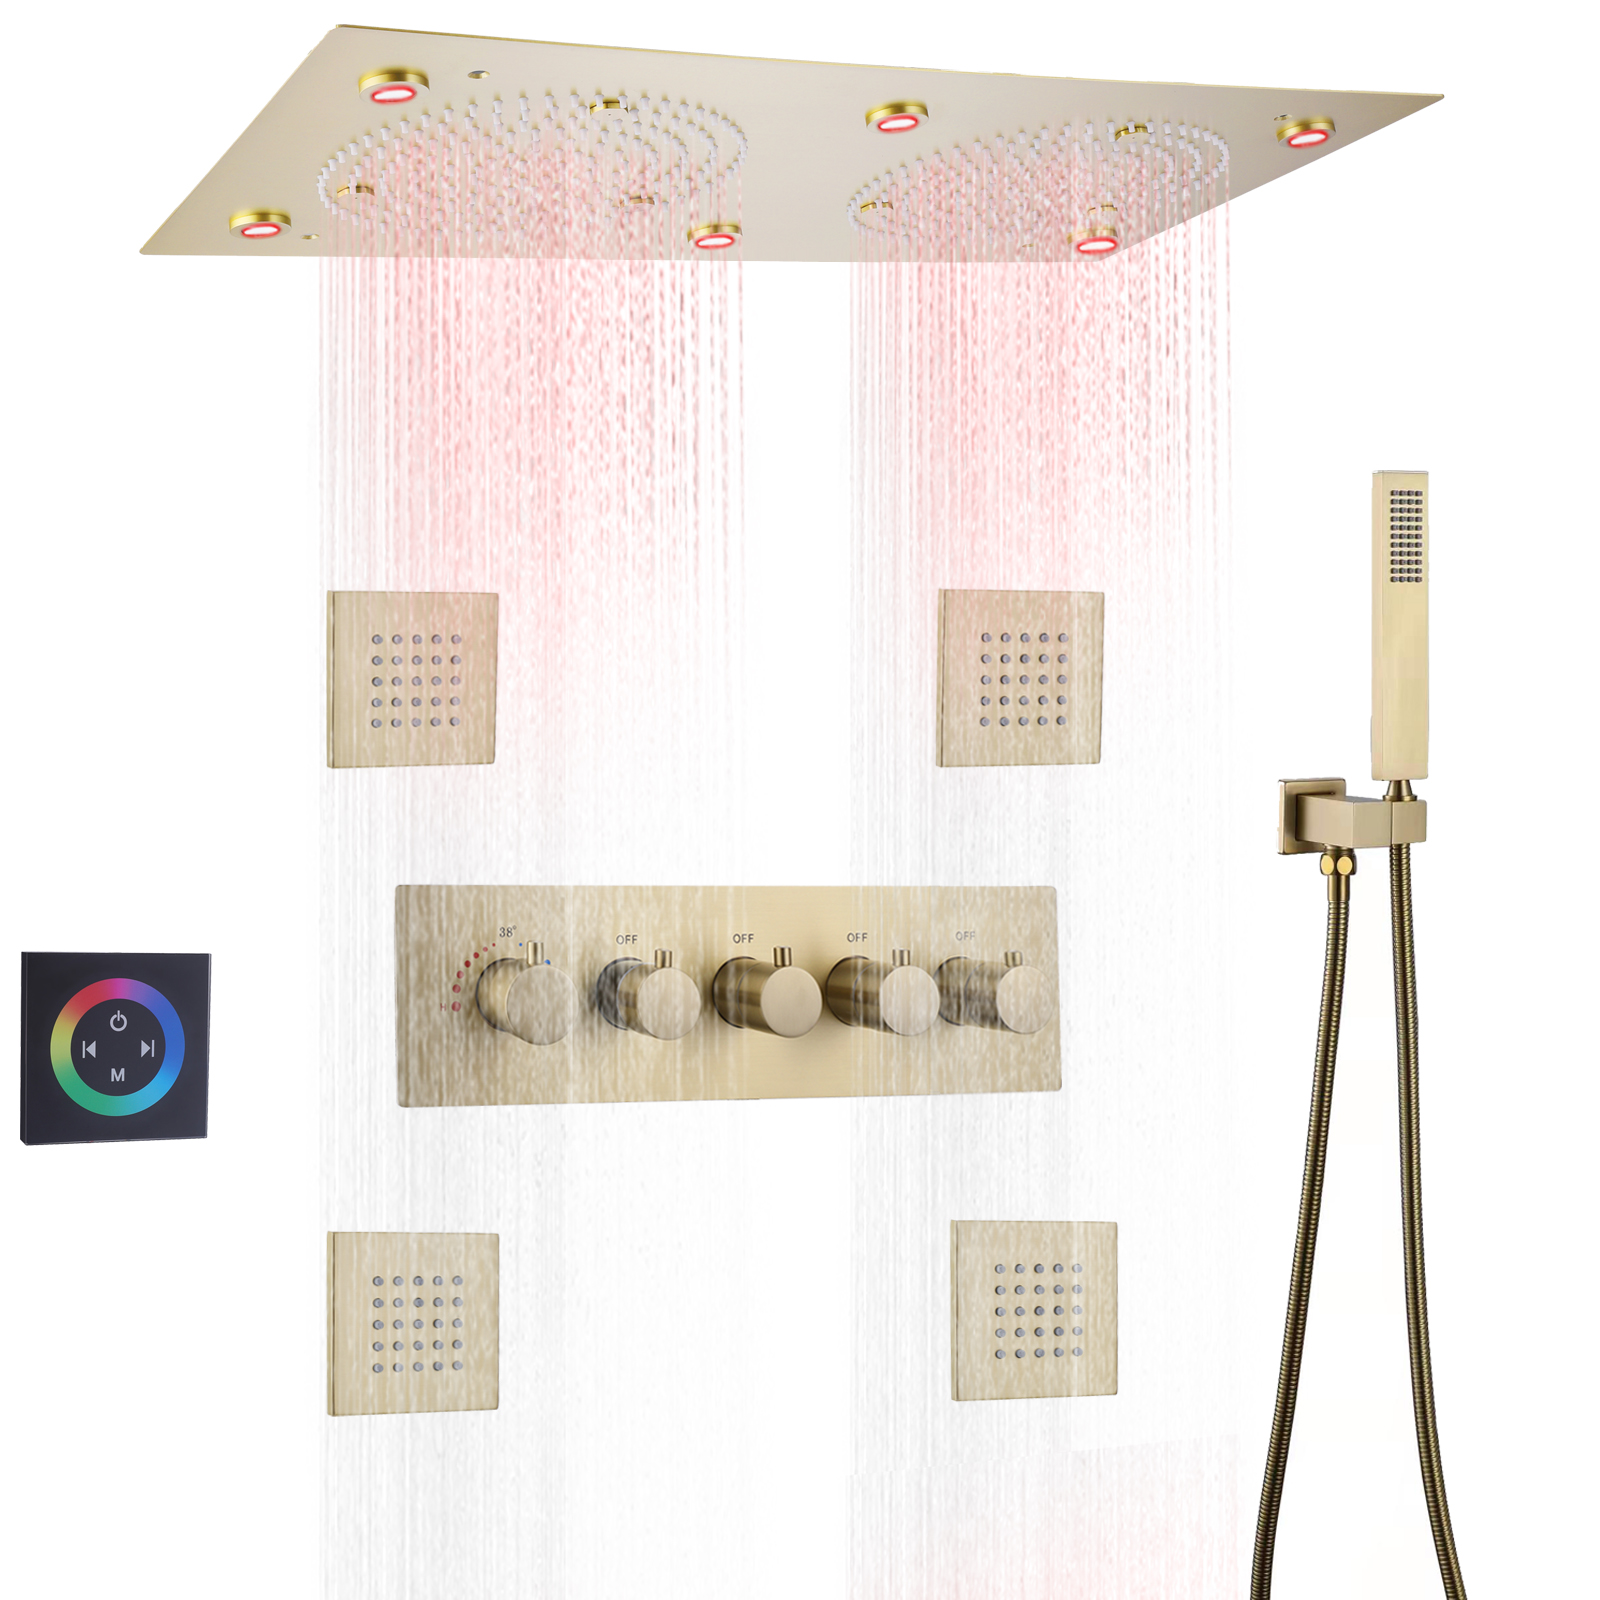 Brushed Gold 62*32 CM LED Wall Mounted Shower Thermostatic High Flow Rainfall Shower Faucet